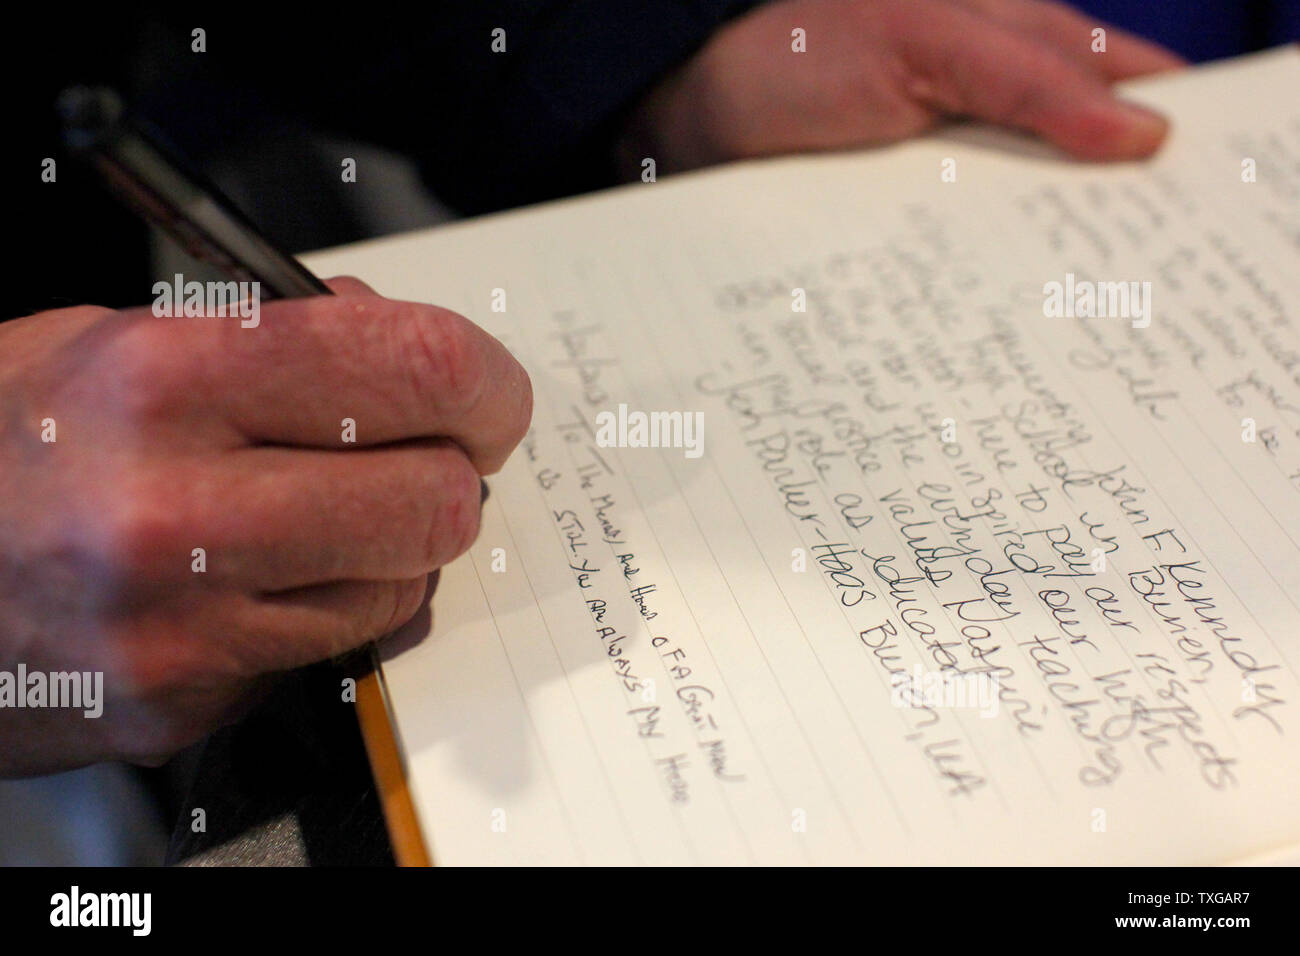 John Bates of Melrose, Massachusetts signs a memory book dedicated to President John F. Kennedy inside the John F. Kennedy Presidential Library and Museum in Boston on November 22, 2013.  Today marks the 50th Anniversary of JFK's assassination in Dallas.  UPI/Matthew Healey Stock Photo